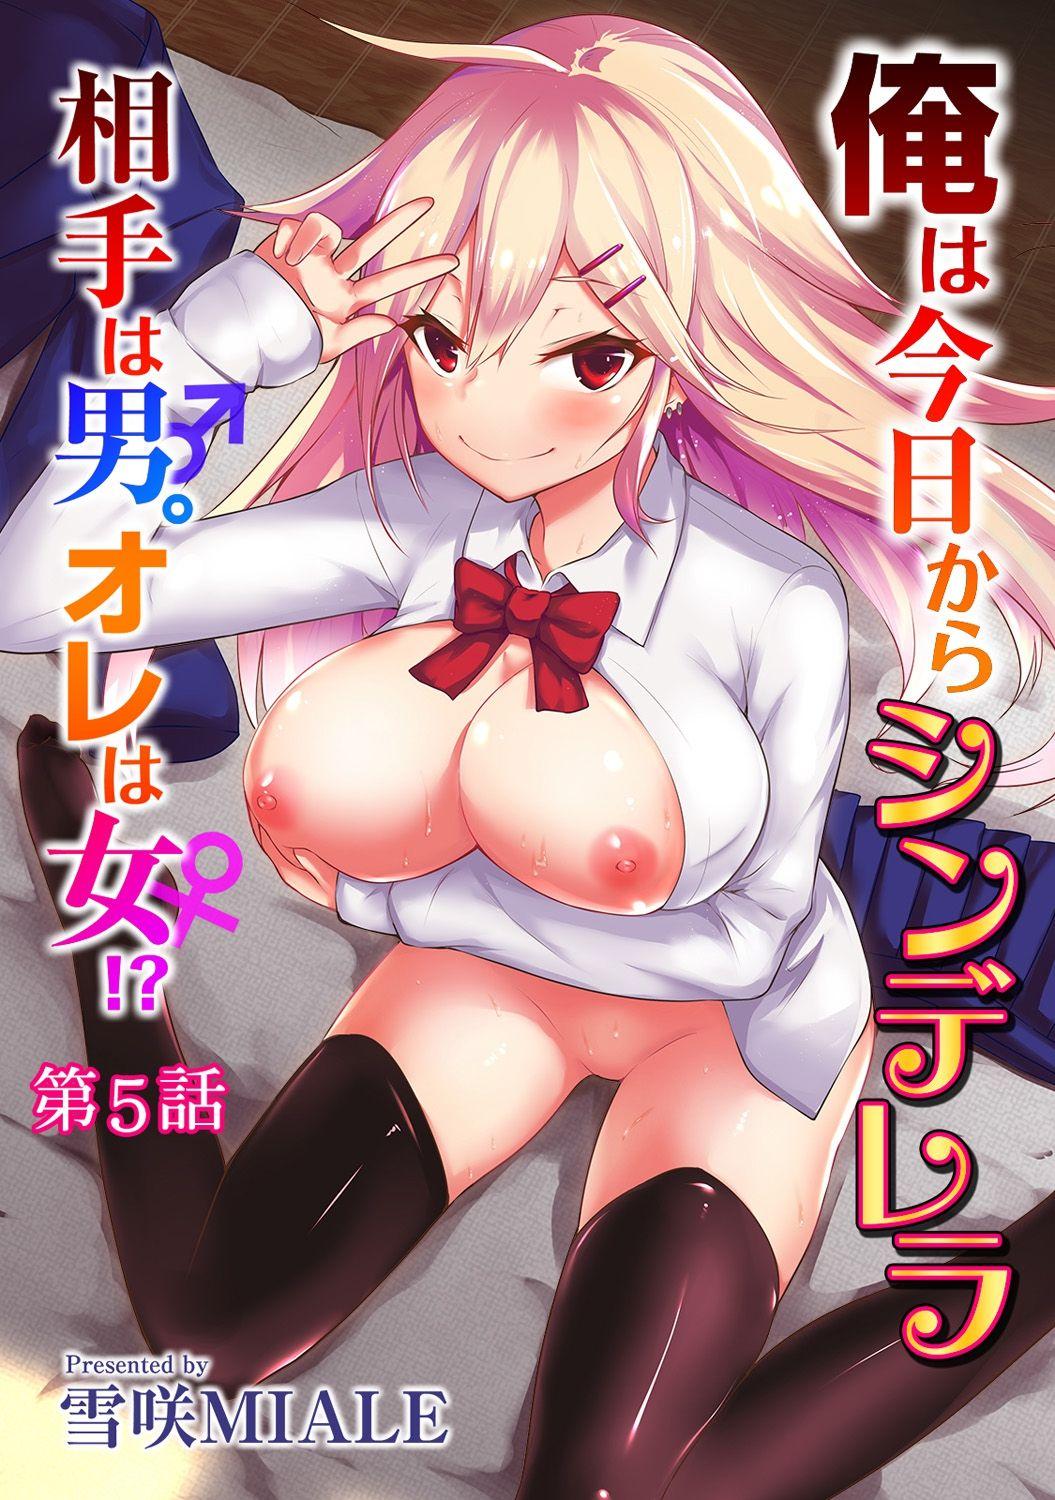 Made Ore wa Kyou kara Cinderella Aite wa Otoko. Ore wa Onna!? | From now on, I’m Cinderella. My Partner is a Man and I’m a Woman!? Ch. 5 Curves - Picture 1